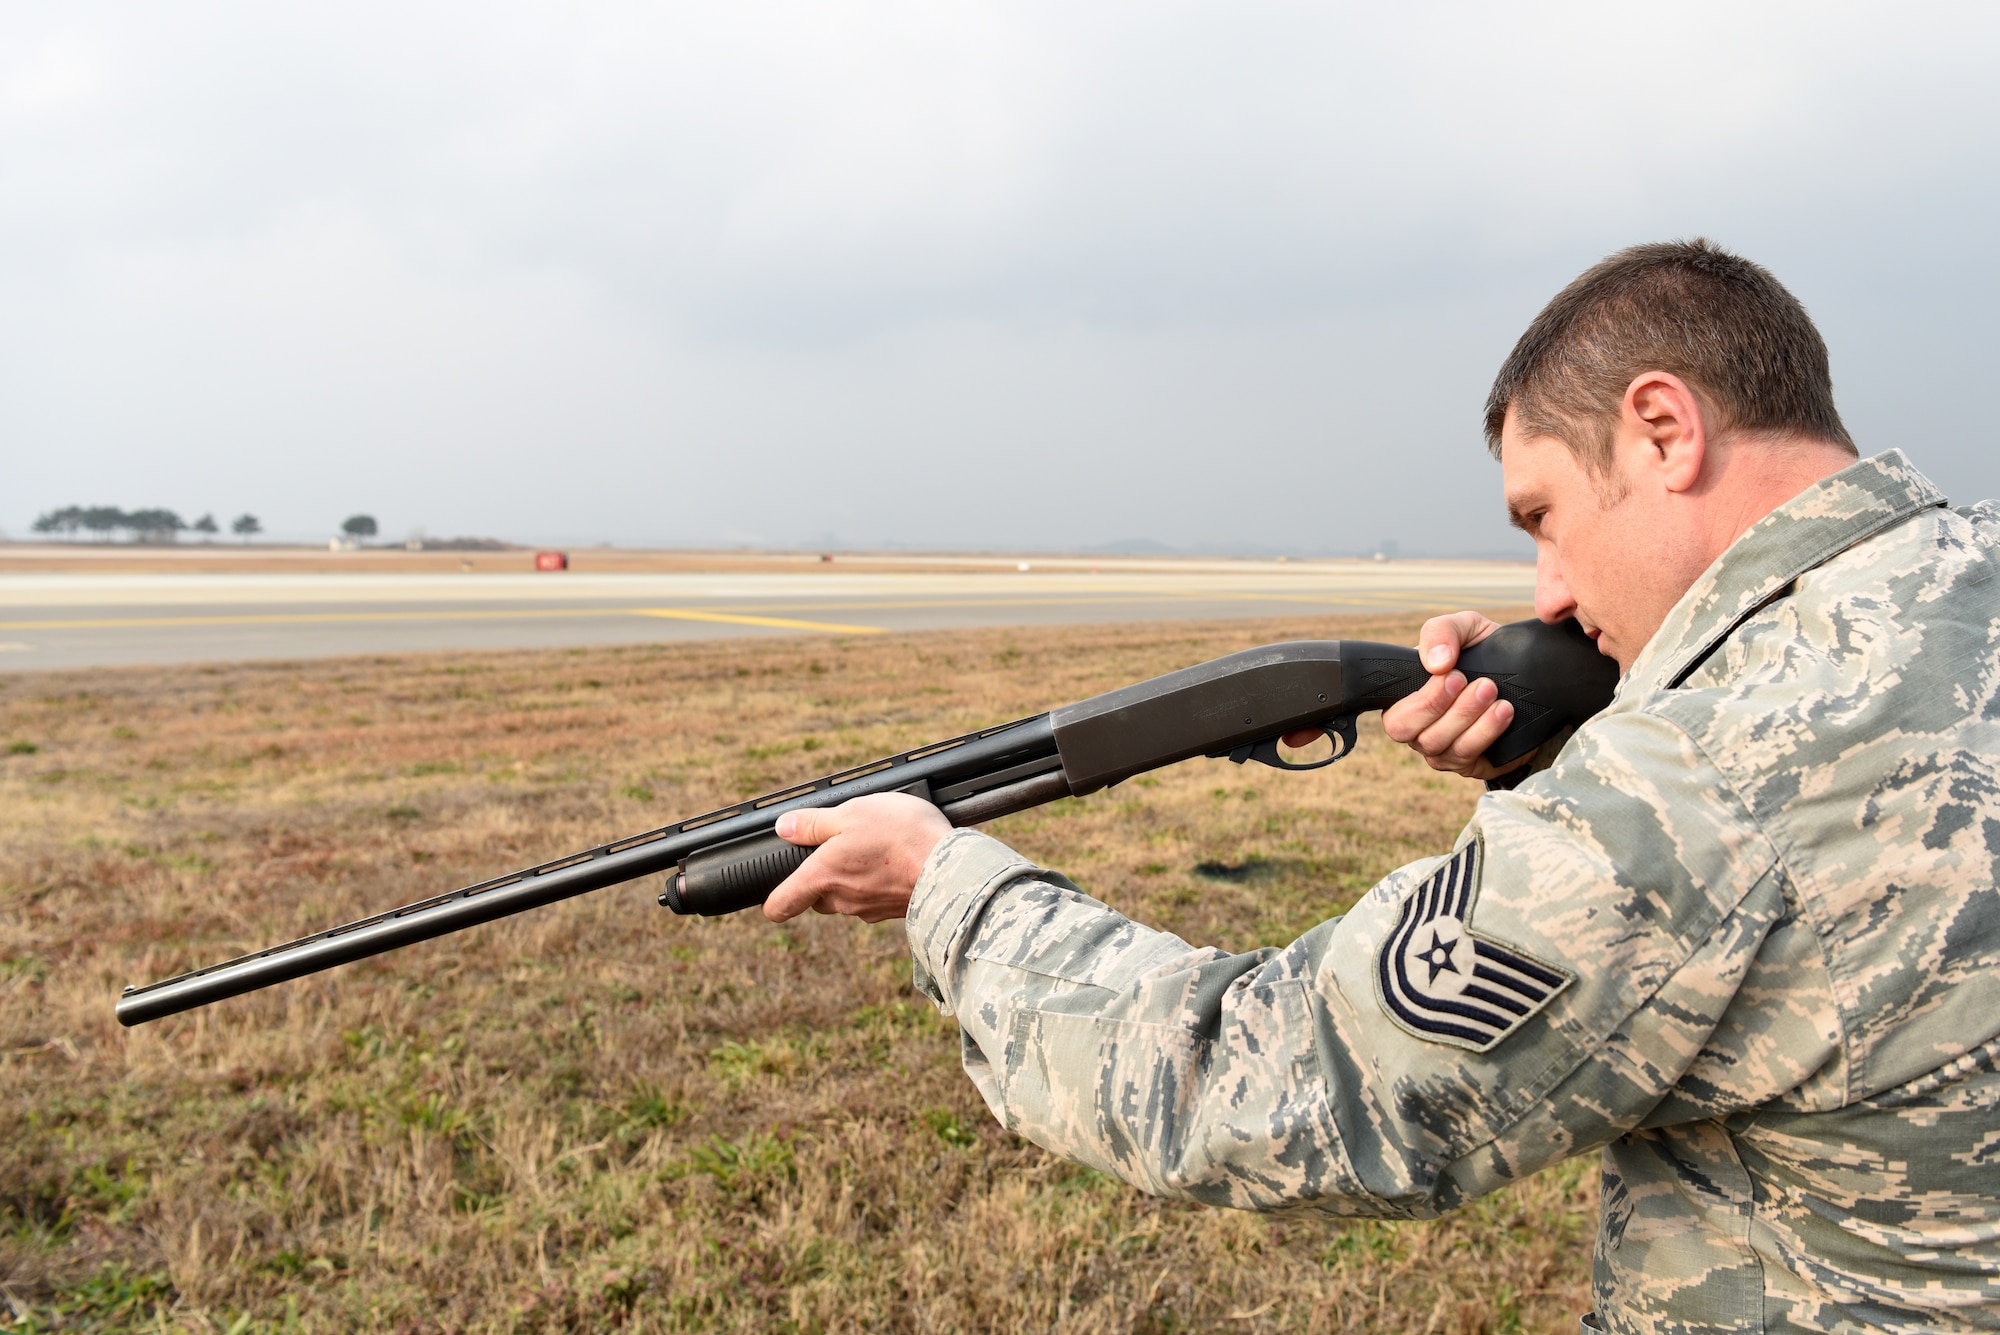 U.S. Air Force Tech. Sgt. Erick Hall, 8th Operations Support Squadron aircrew flight equipment lead trainer, aims a shotgun near the runway at Kunsan Air Base, Republic of Korea, Dec. 13, 2018. Hall is among more than 40 volunteers at Kunsan who ensure the runway is clear of birds and other wildlife during takeoffs. (U.S. Air Force photo by Staff Sgt. Joshua Edwards)